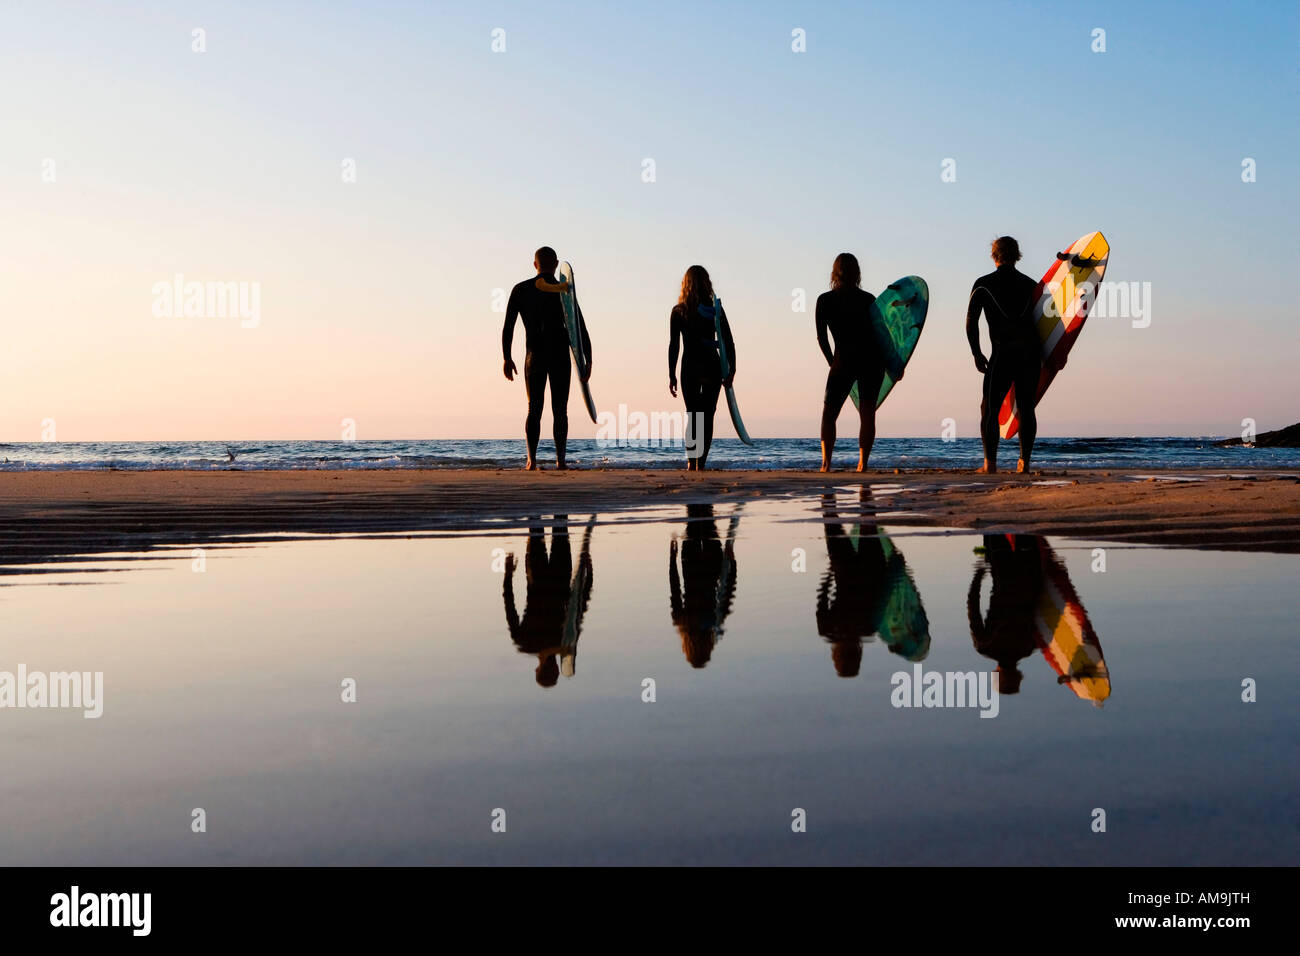 Four people standing on the beach with surfboards. Stock Photo